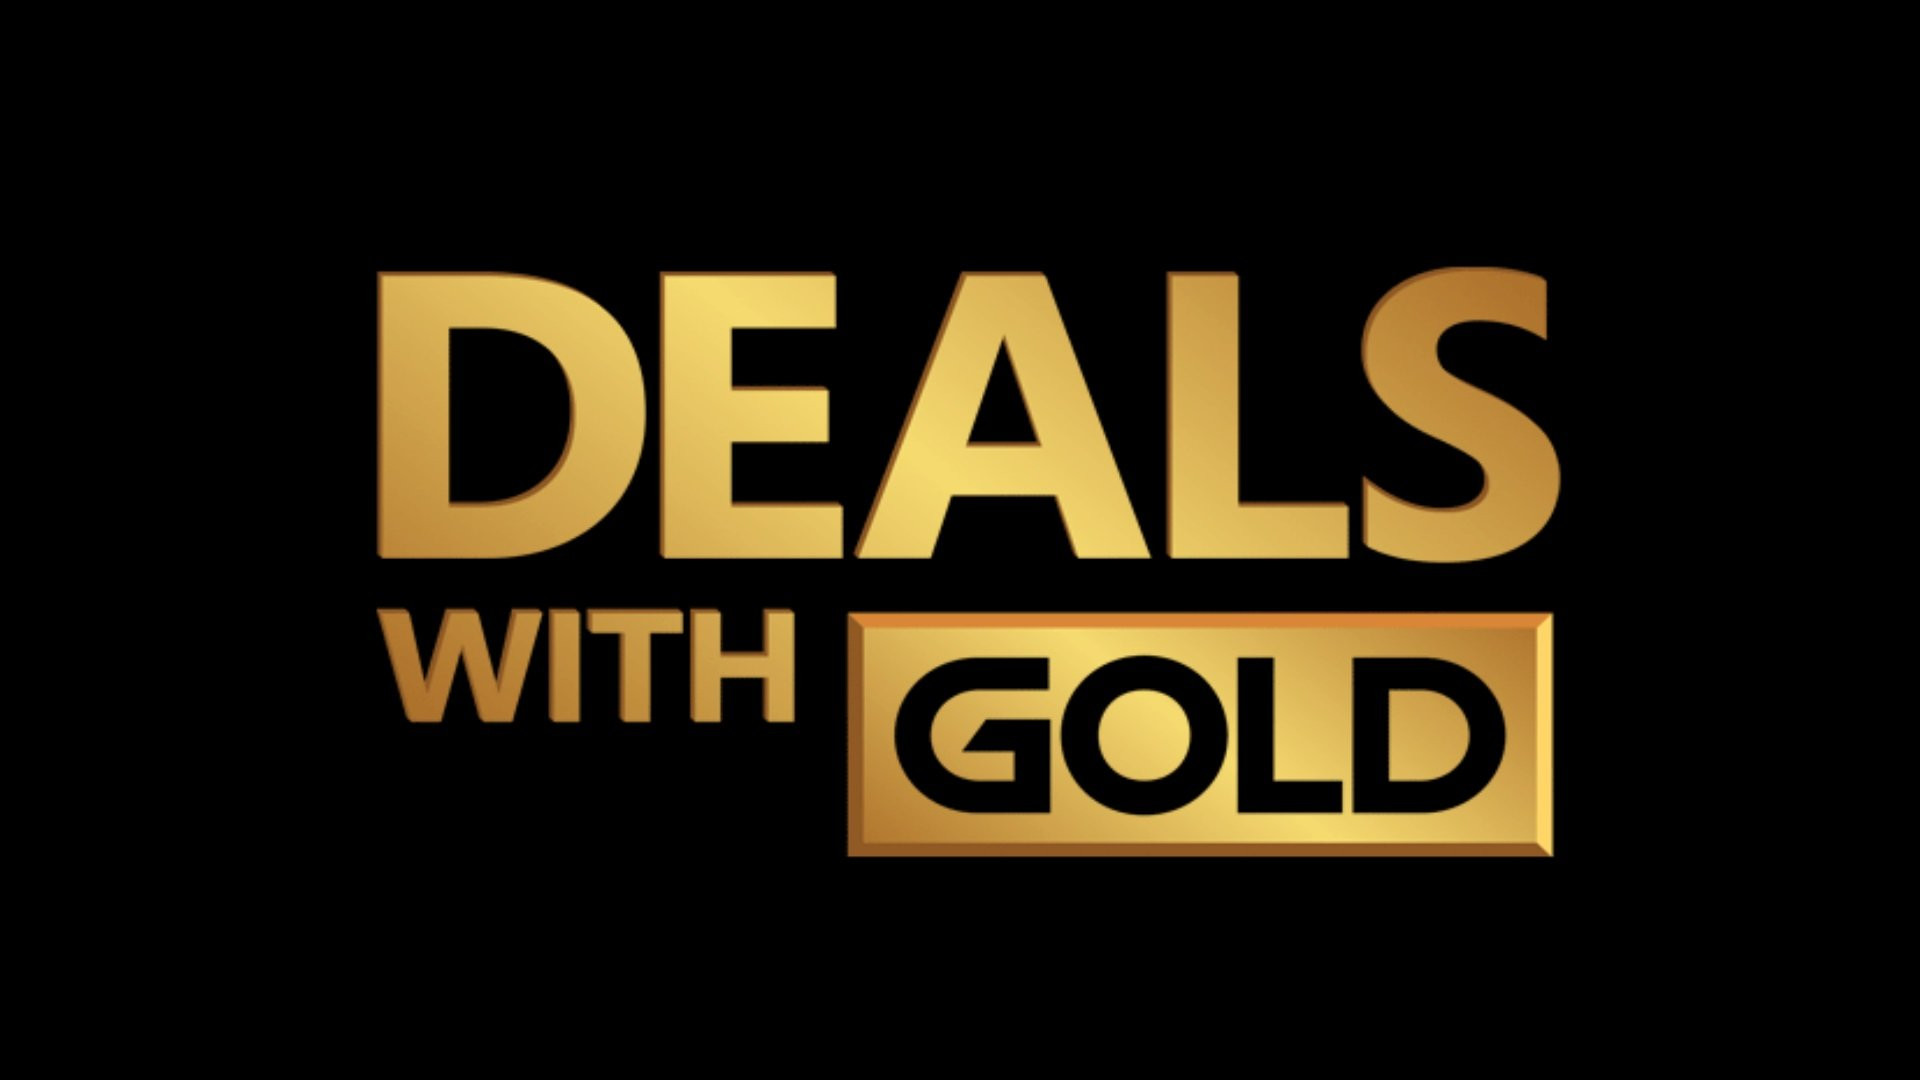 Deals with Gold semaine 38